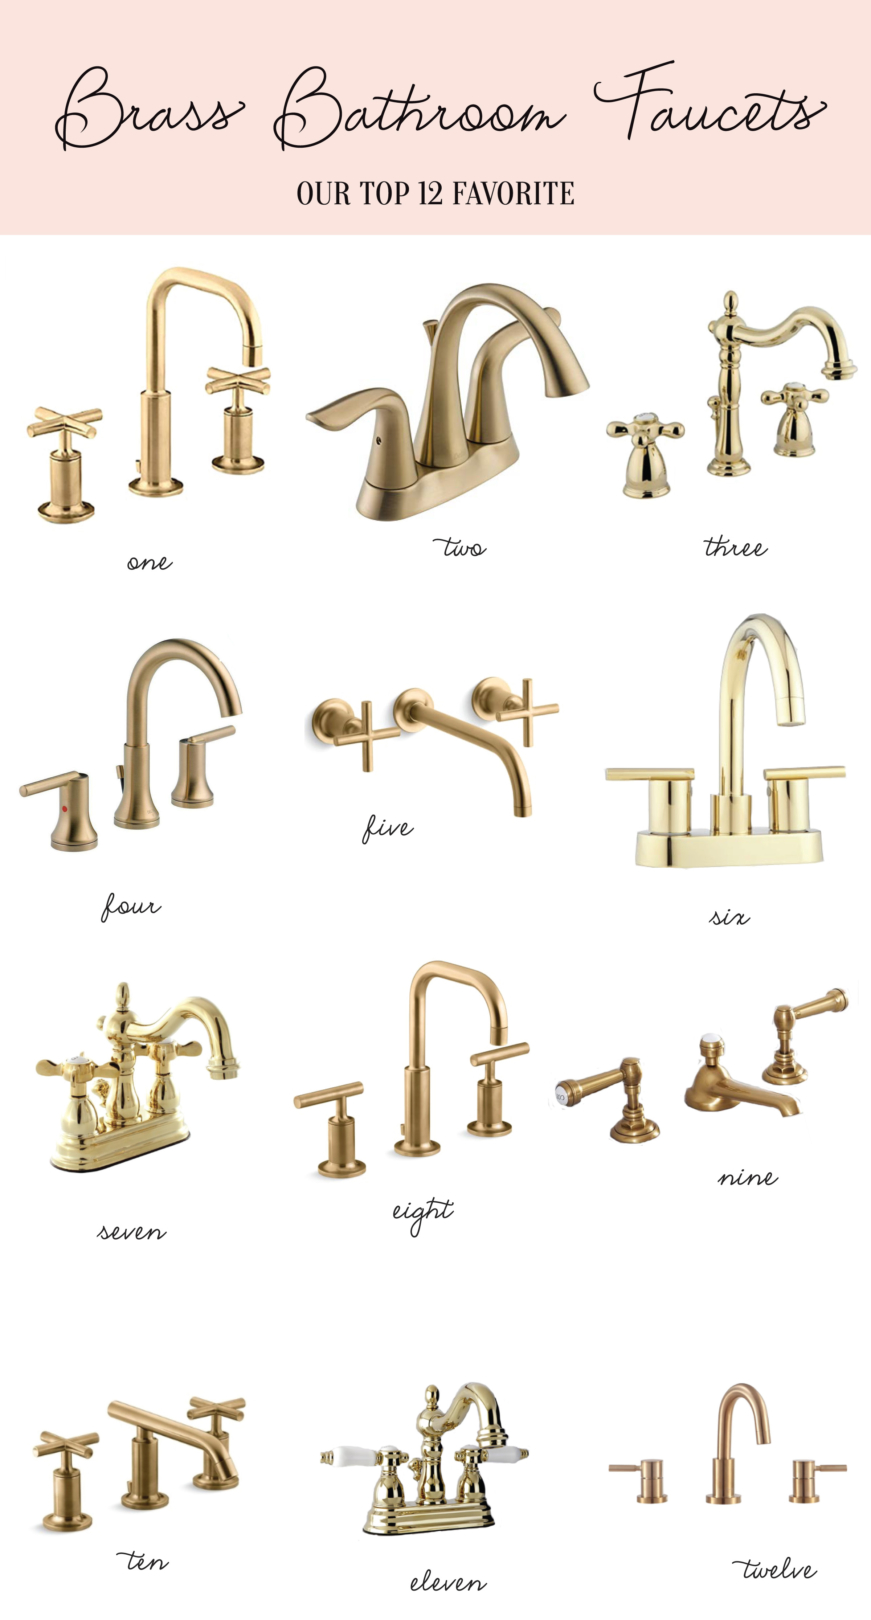 Home: Brass Bathroom Faucets